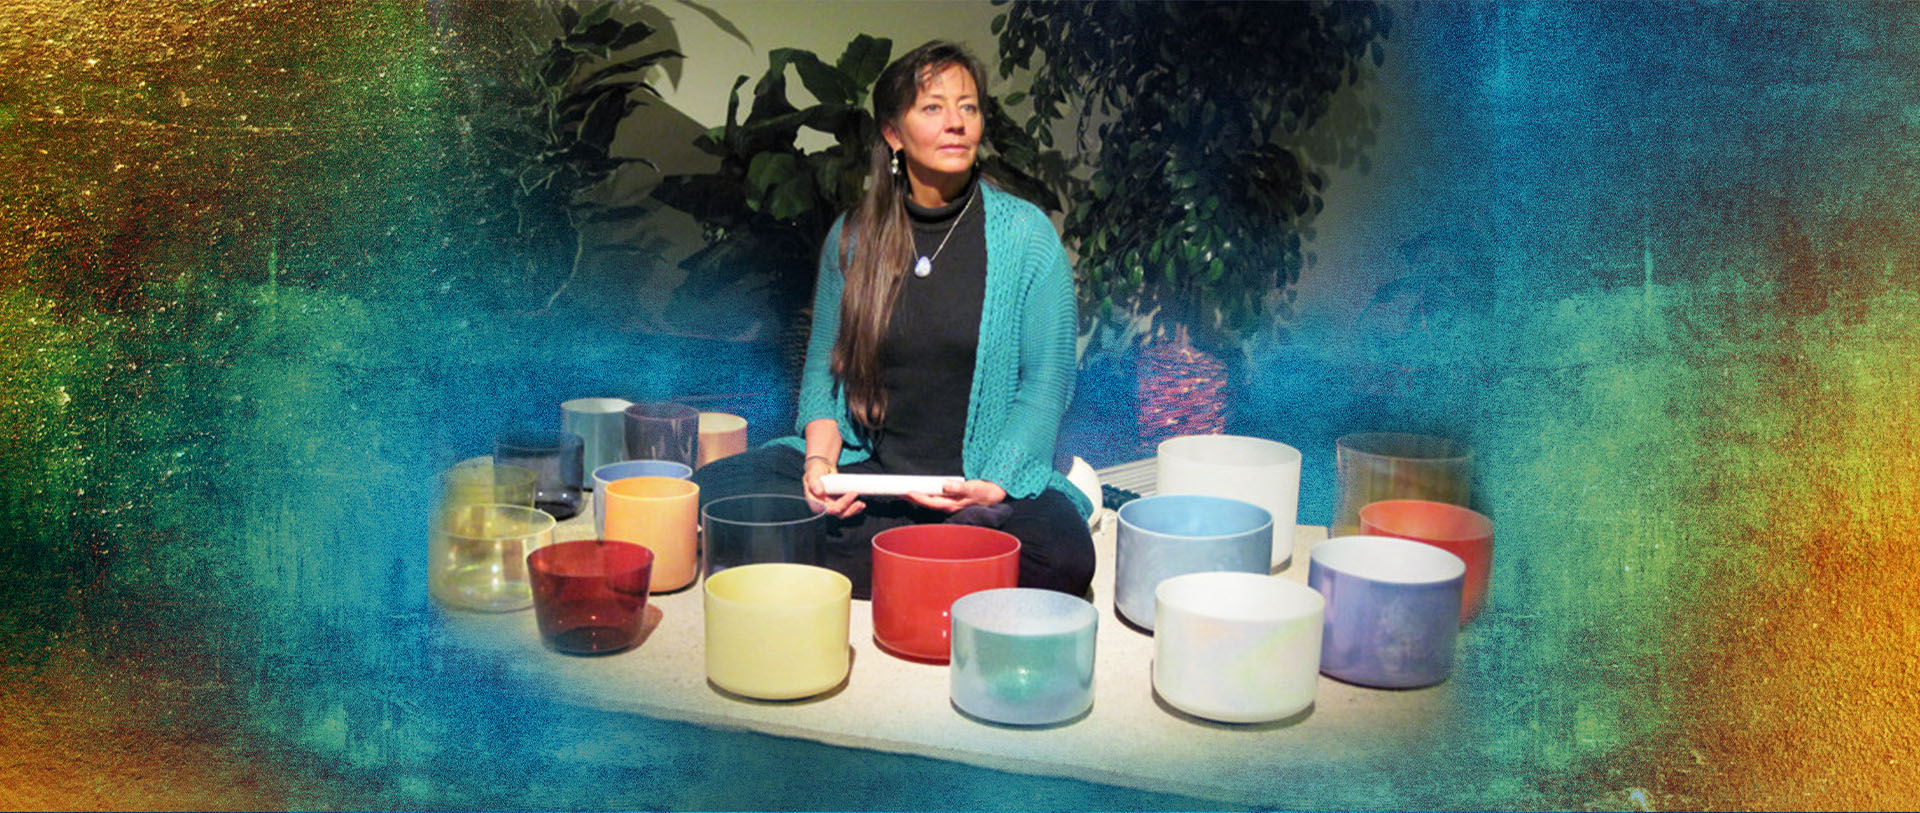 Nancy Hopps and her sound bowls